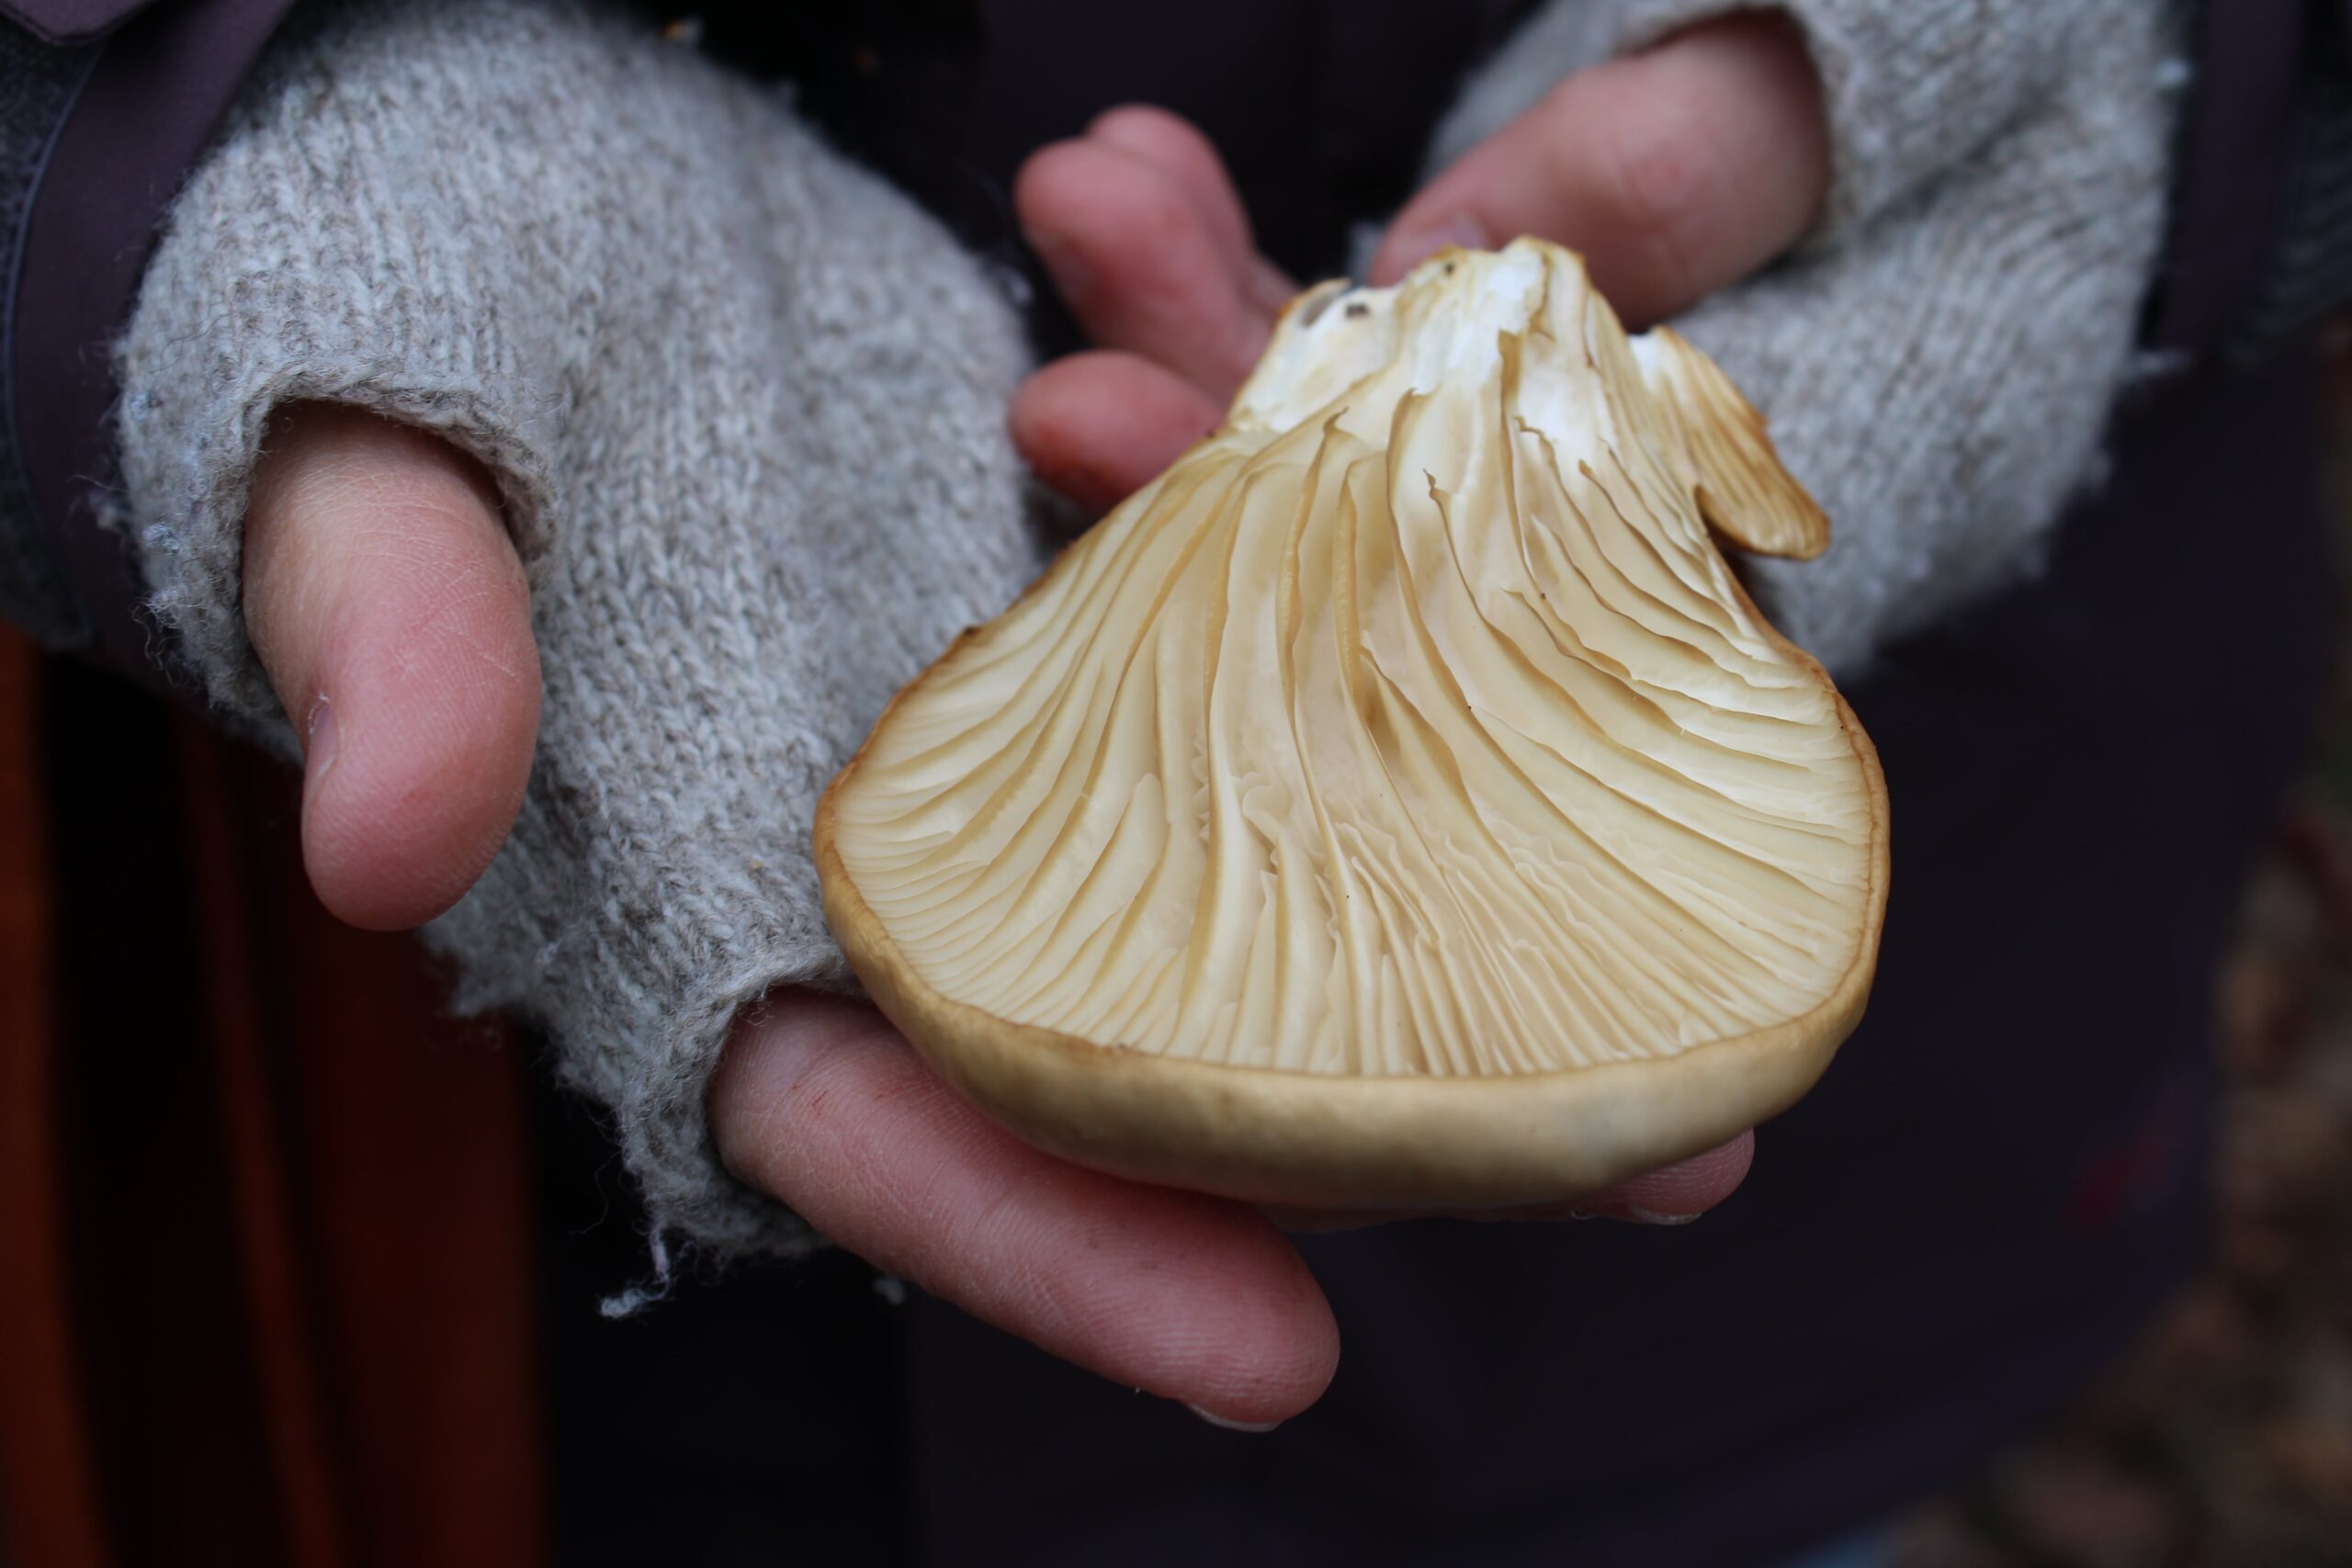 Two hands with grey fingerless gloves hold up the ridged underside of a white oyster mushroom